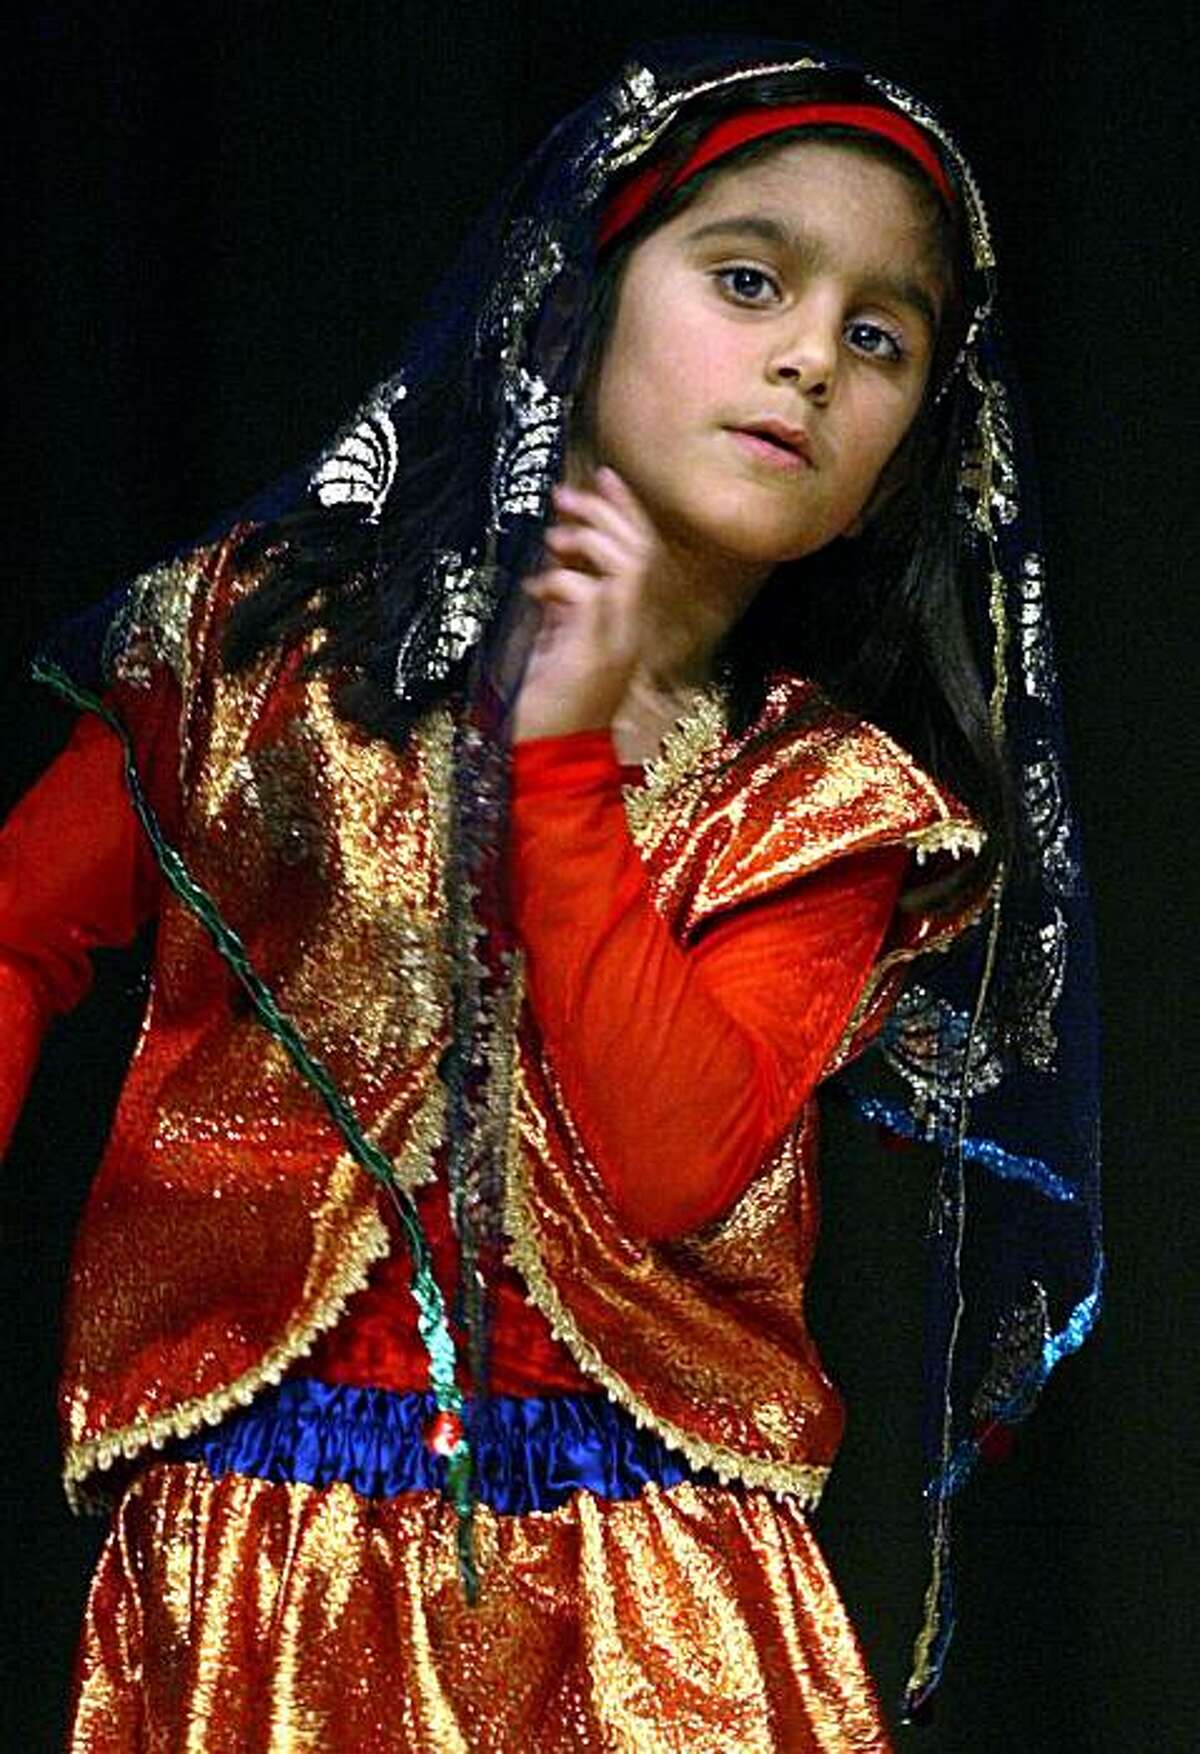 Tara Taeed, 7 years old, from the Shahrzad Dance Academy dances "Aroosak" at the Persian festival taking place at Bentley School. Photo taken on 02/25/04 in Oakland, CA. Photo By LIZ HAFALIA / The San Francisco Chronicle